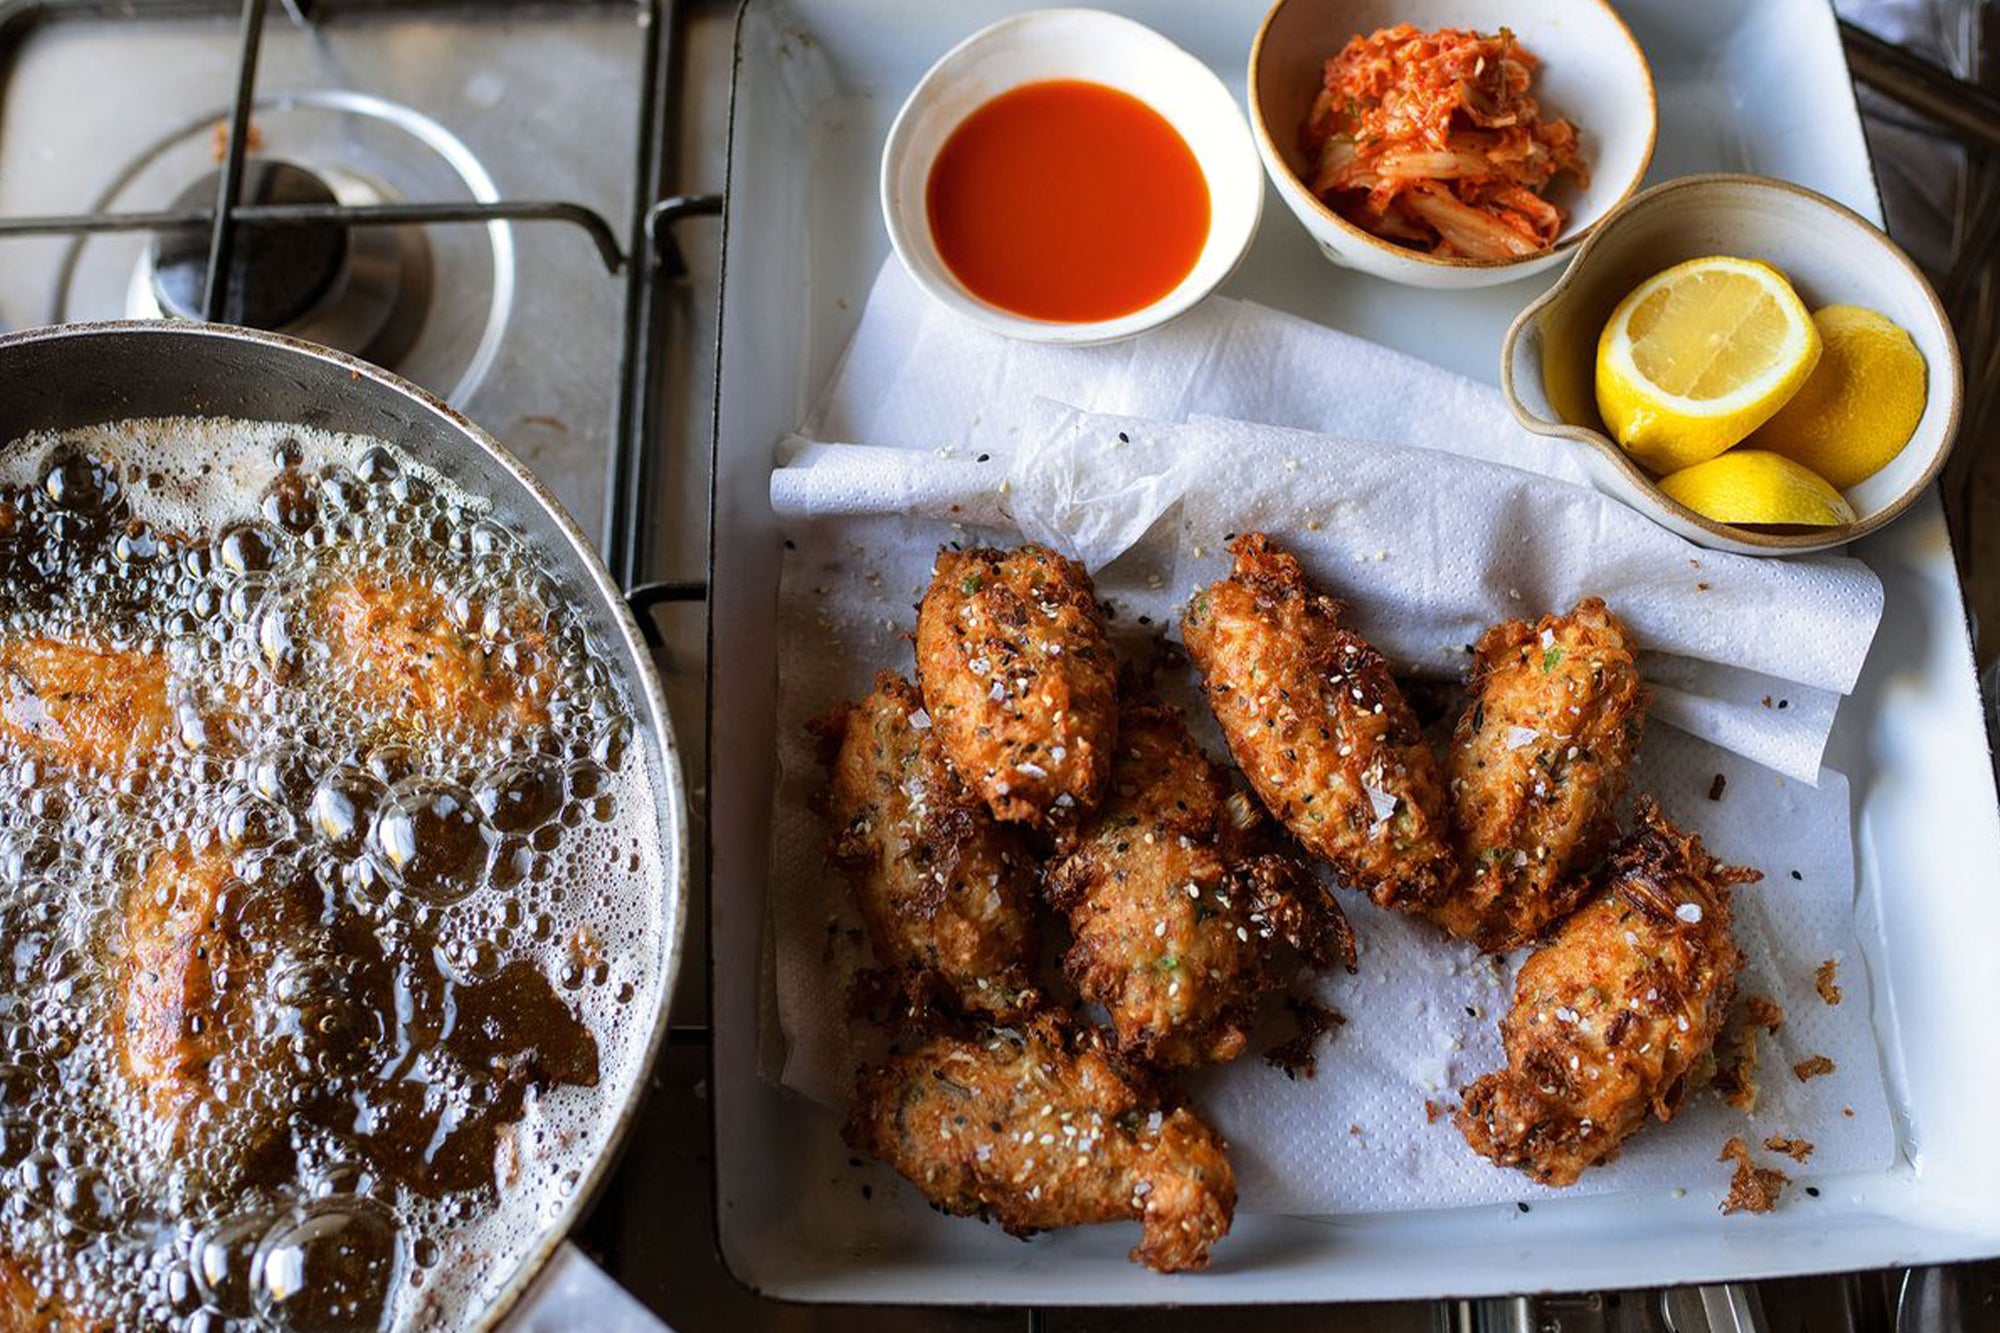 Kimchi and gruyere rice fritters